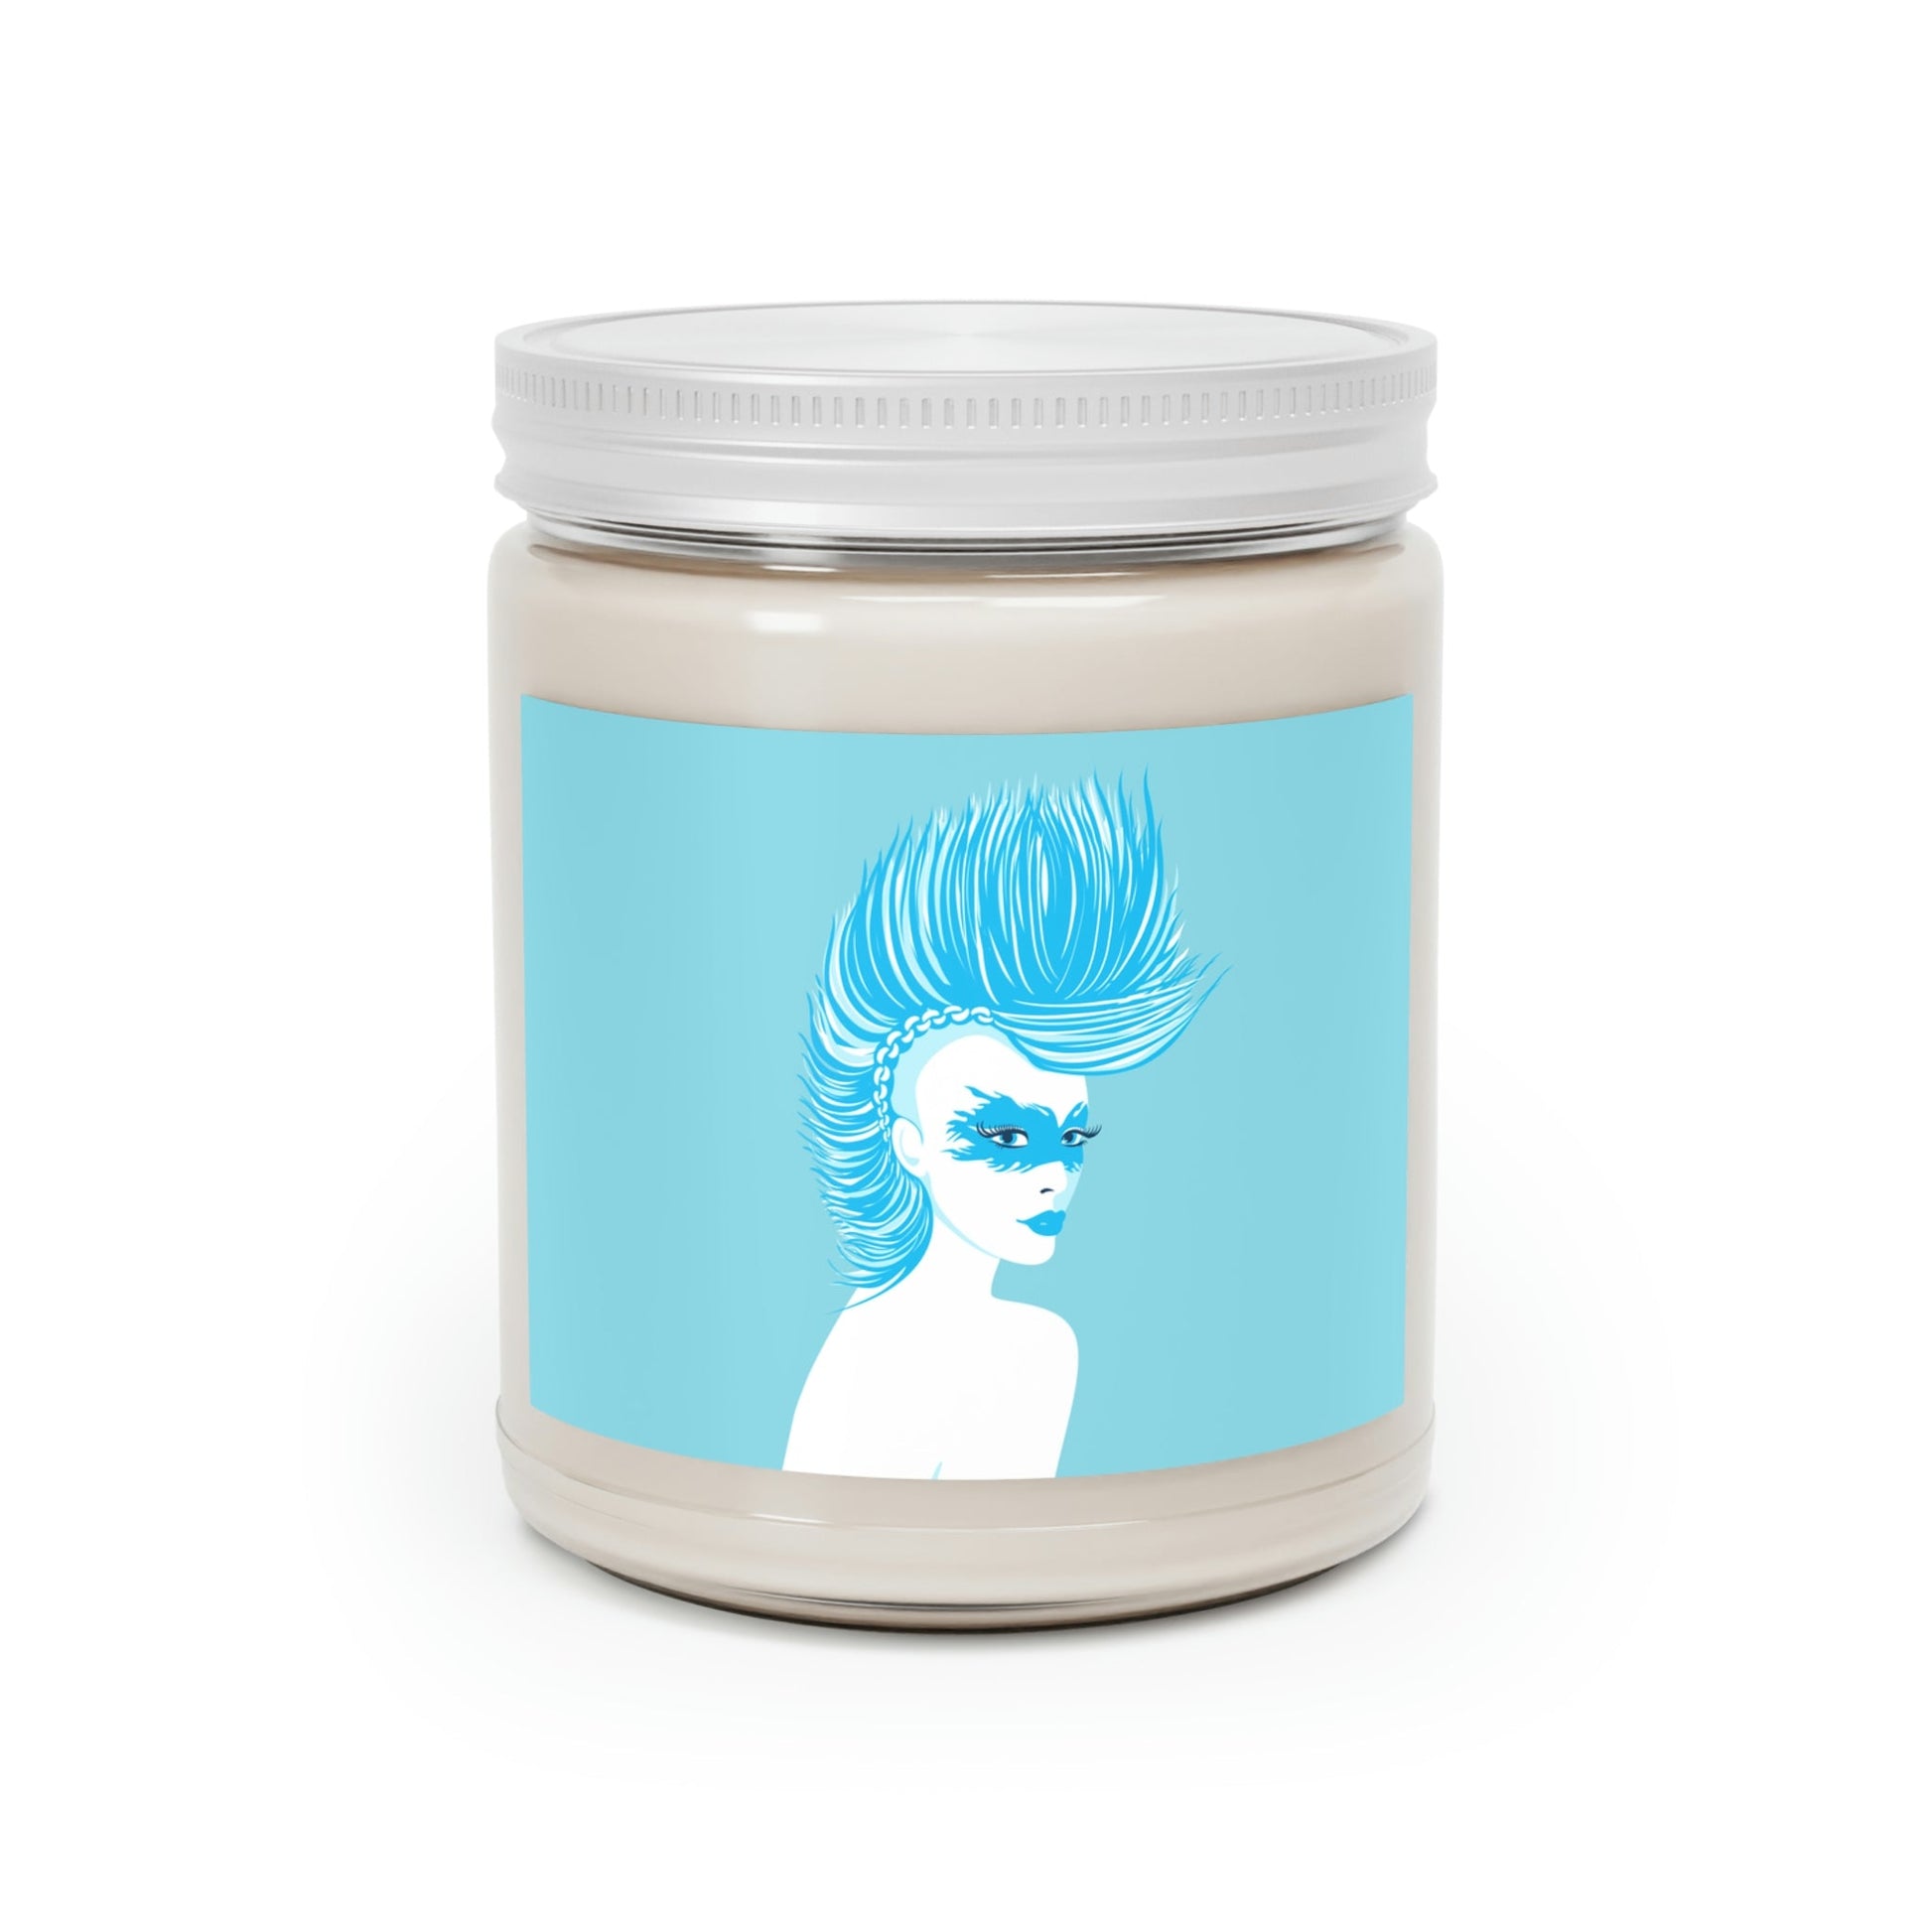 Blue Punk Woman Art Unique Edgy Graphic Scented Candle Up to 60hSoy Wax 9oz Ichaku [Perfect Gifts Selection]